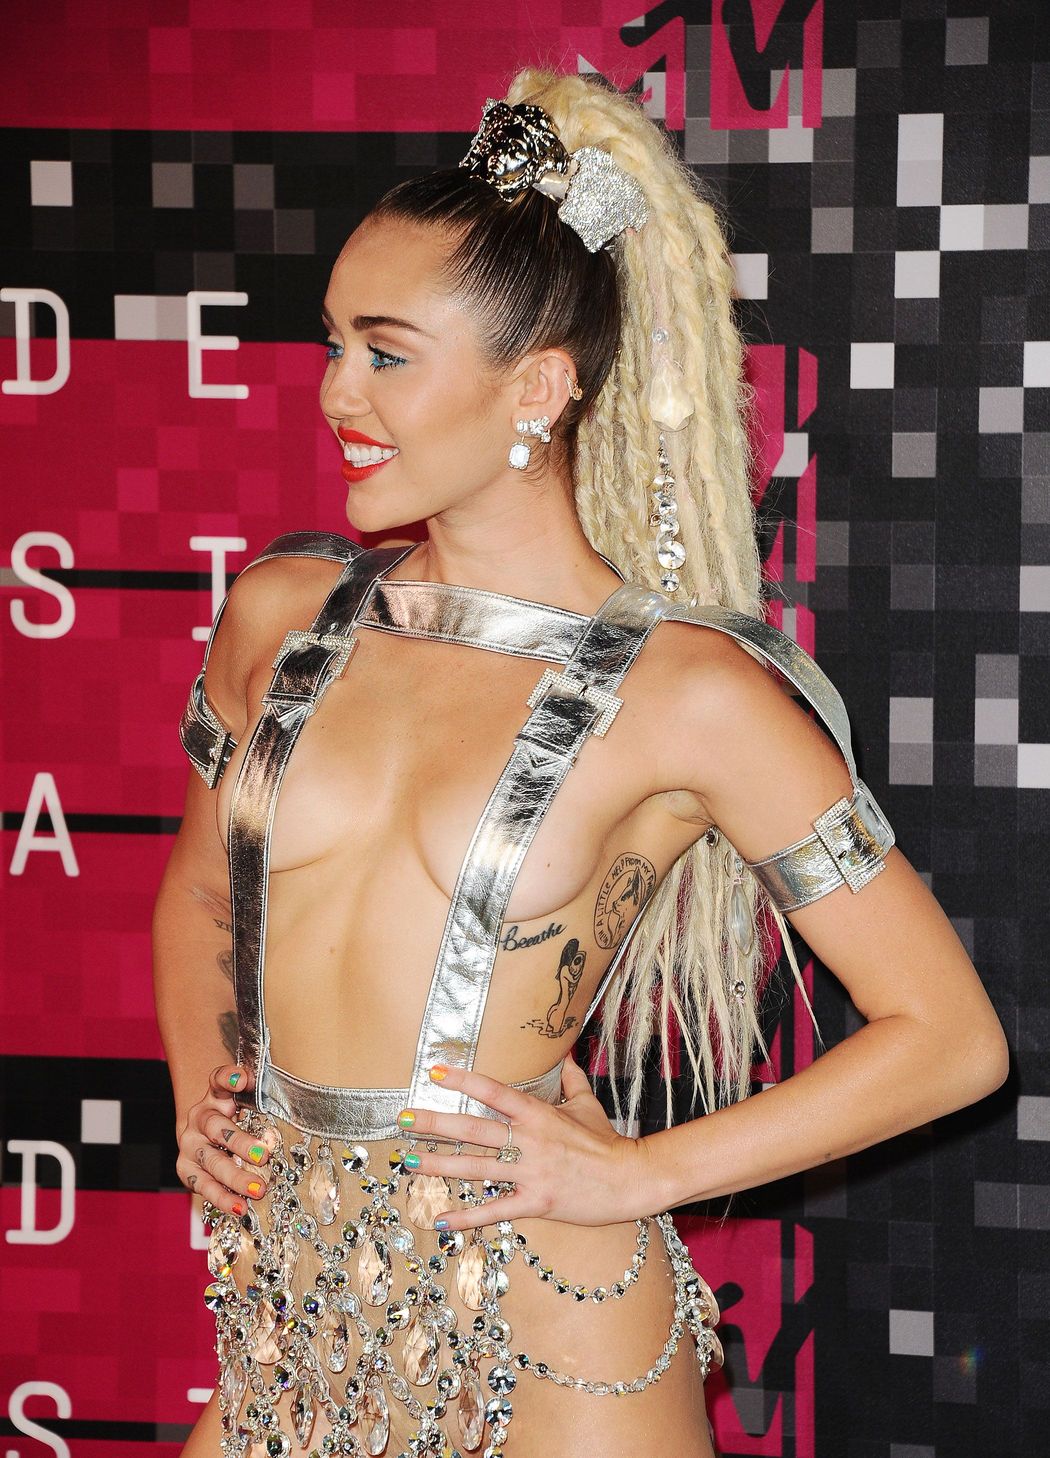 08 30 2015 Miley Cyrus Hot Photos The Fappening News